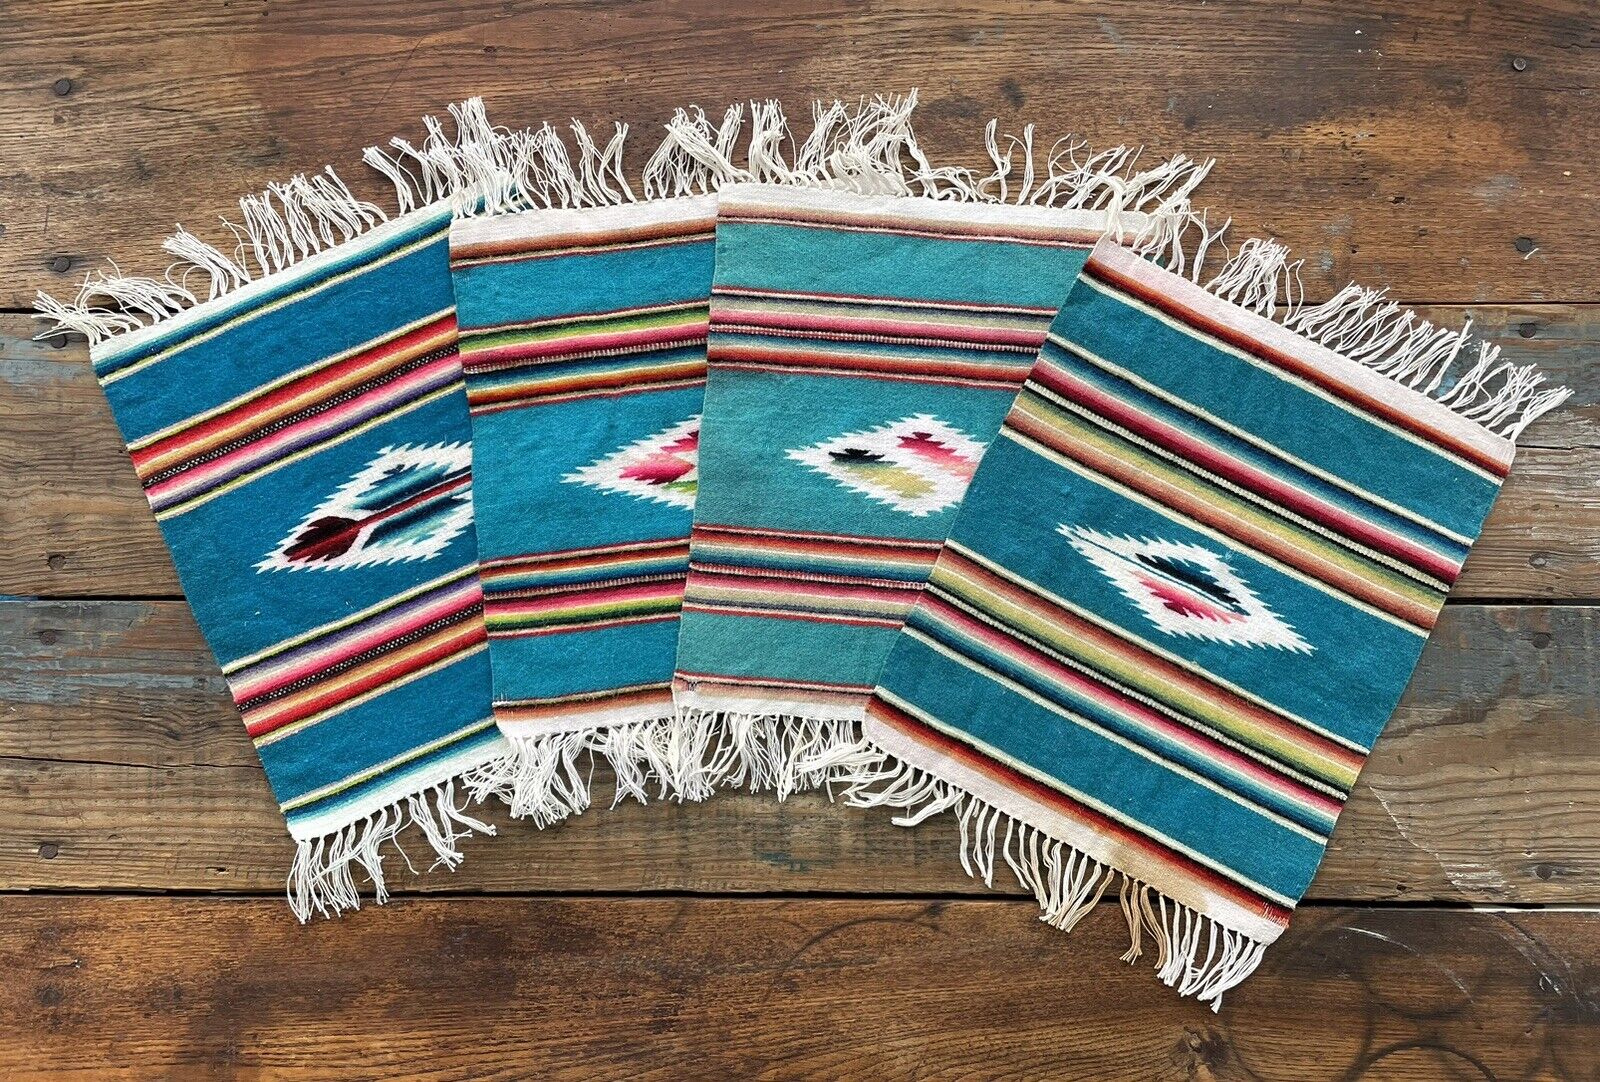 VTG Southwestern Mexican Woven Placemats Chimayo Style Set of 4